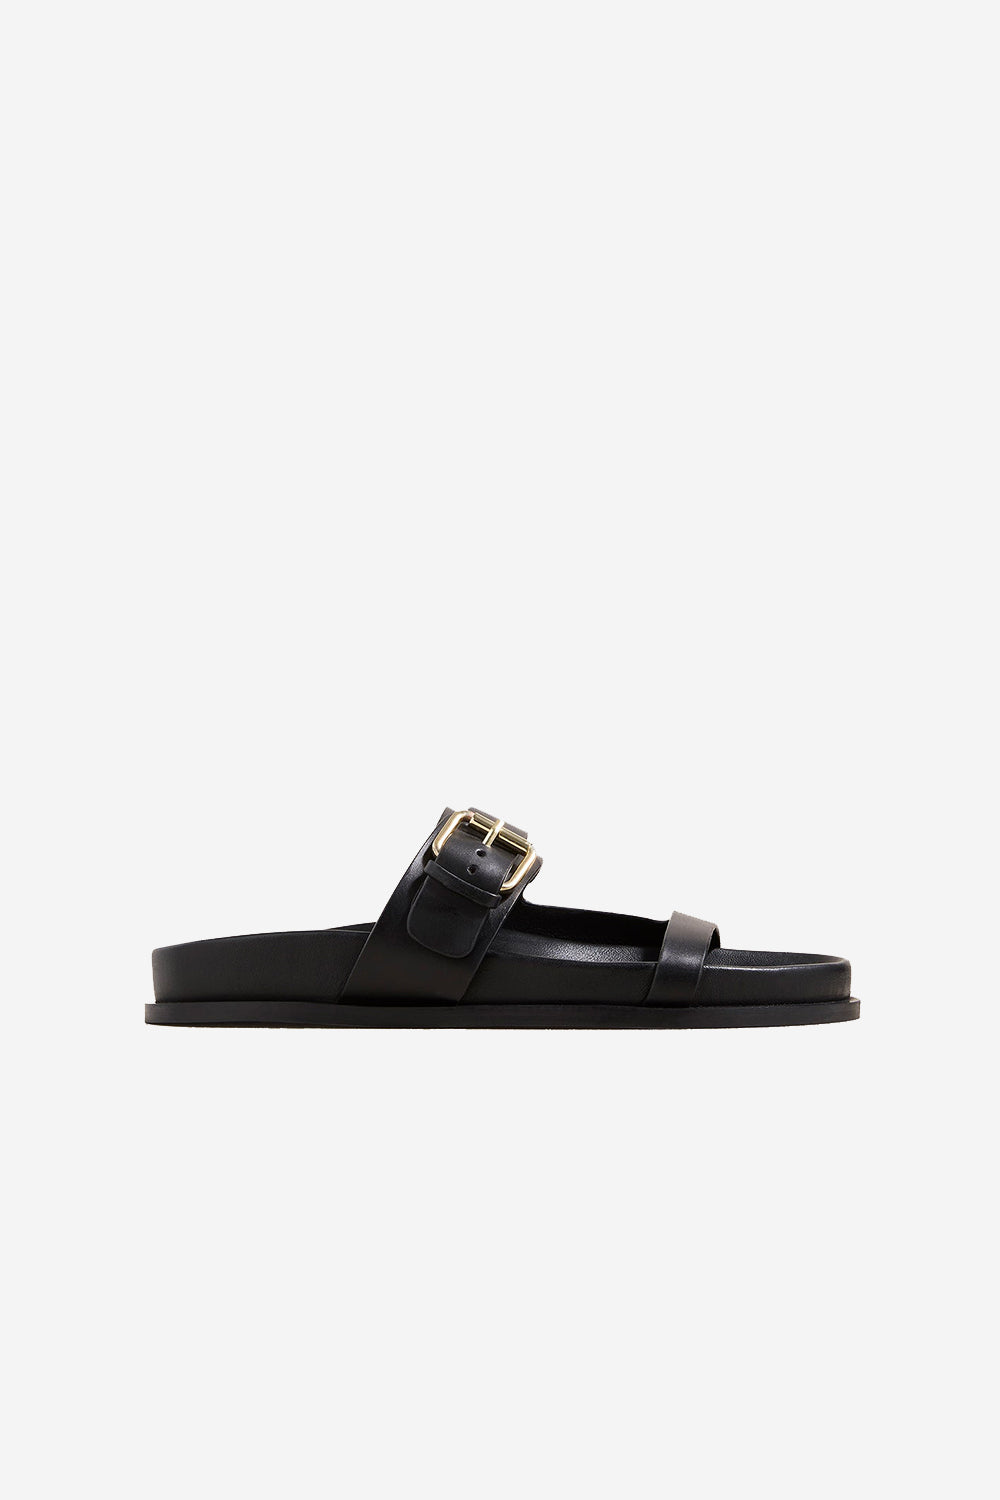 Womens leather sandal | A.Emery Prince sandal | The Standard Store